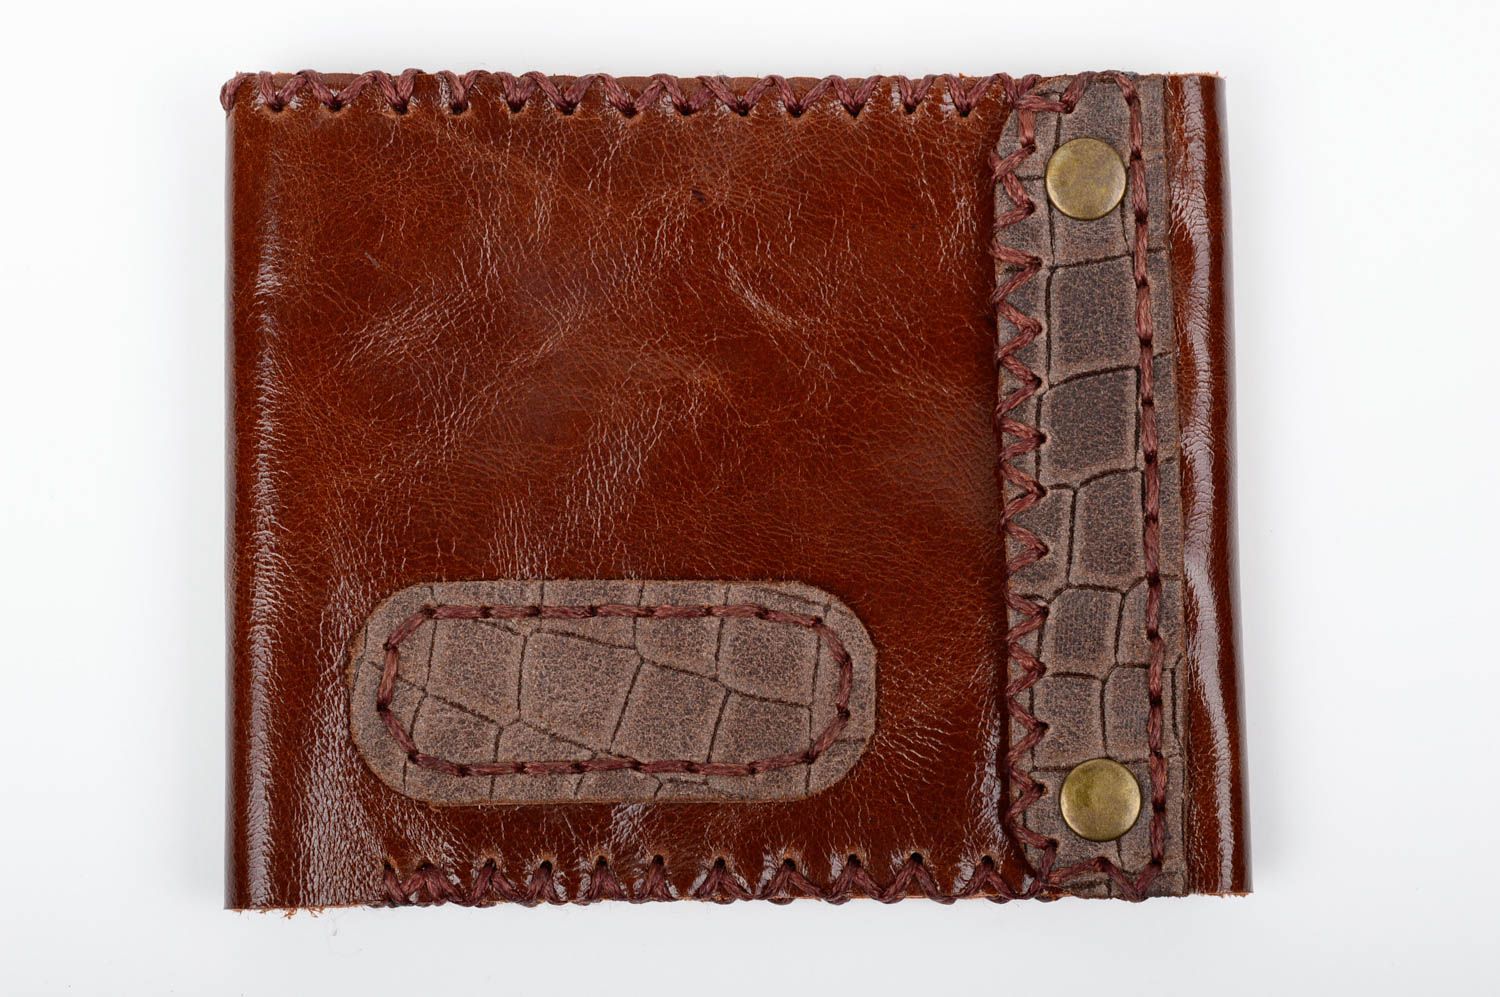 Unusual handmade leather wallet designer accessories leather goods gift ideas photo 1